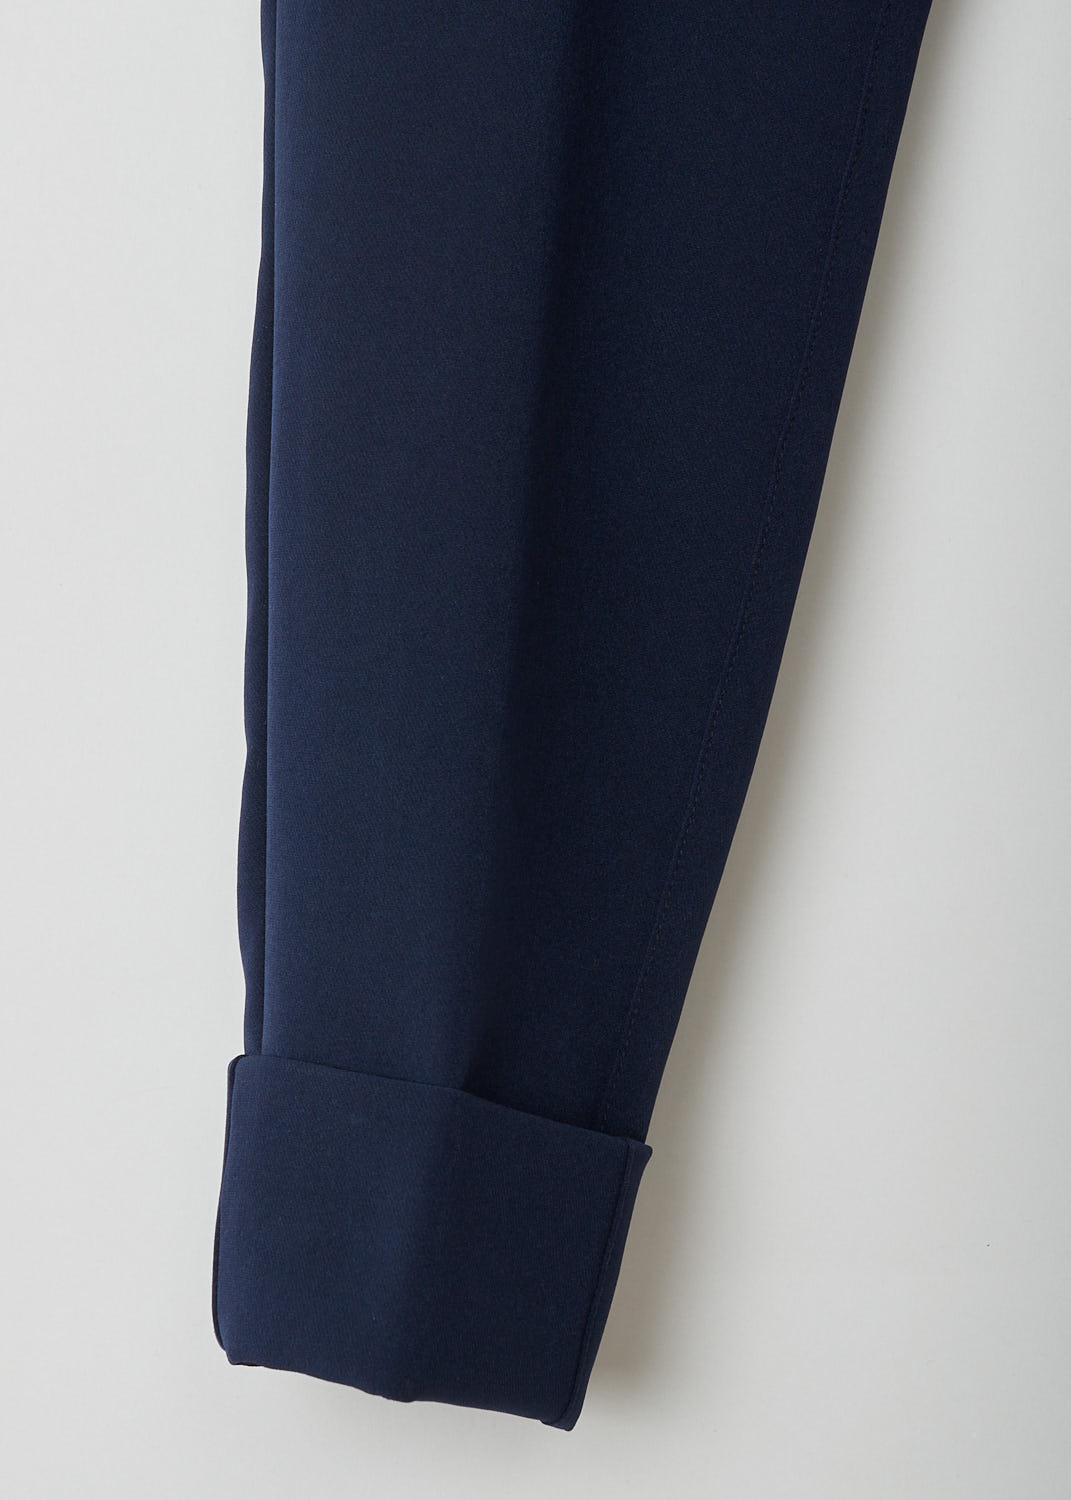 CLOSED, CLASSIC NAVY TROUSERS, Stewart_C91796_37G_22_568, Blue, Detail, Made in the classic trouser model, featuring forward slanted pockets on the front and two buttoned welt pockets on the back. What makes this model stand out above the rest is the broad fold-over hem.